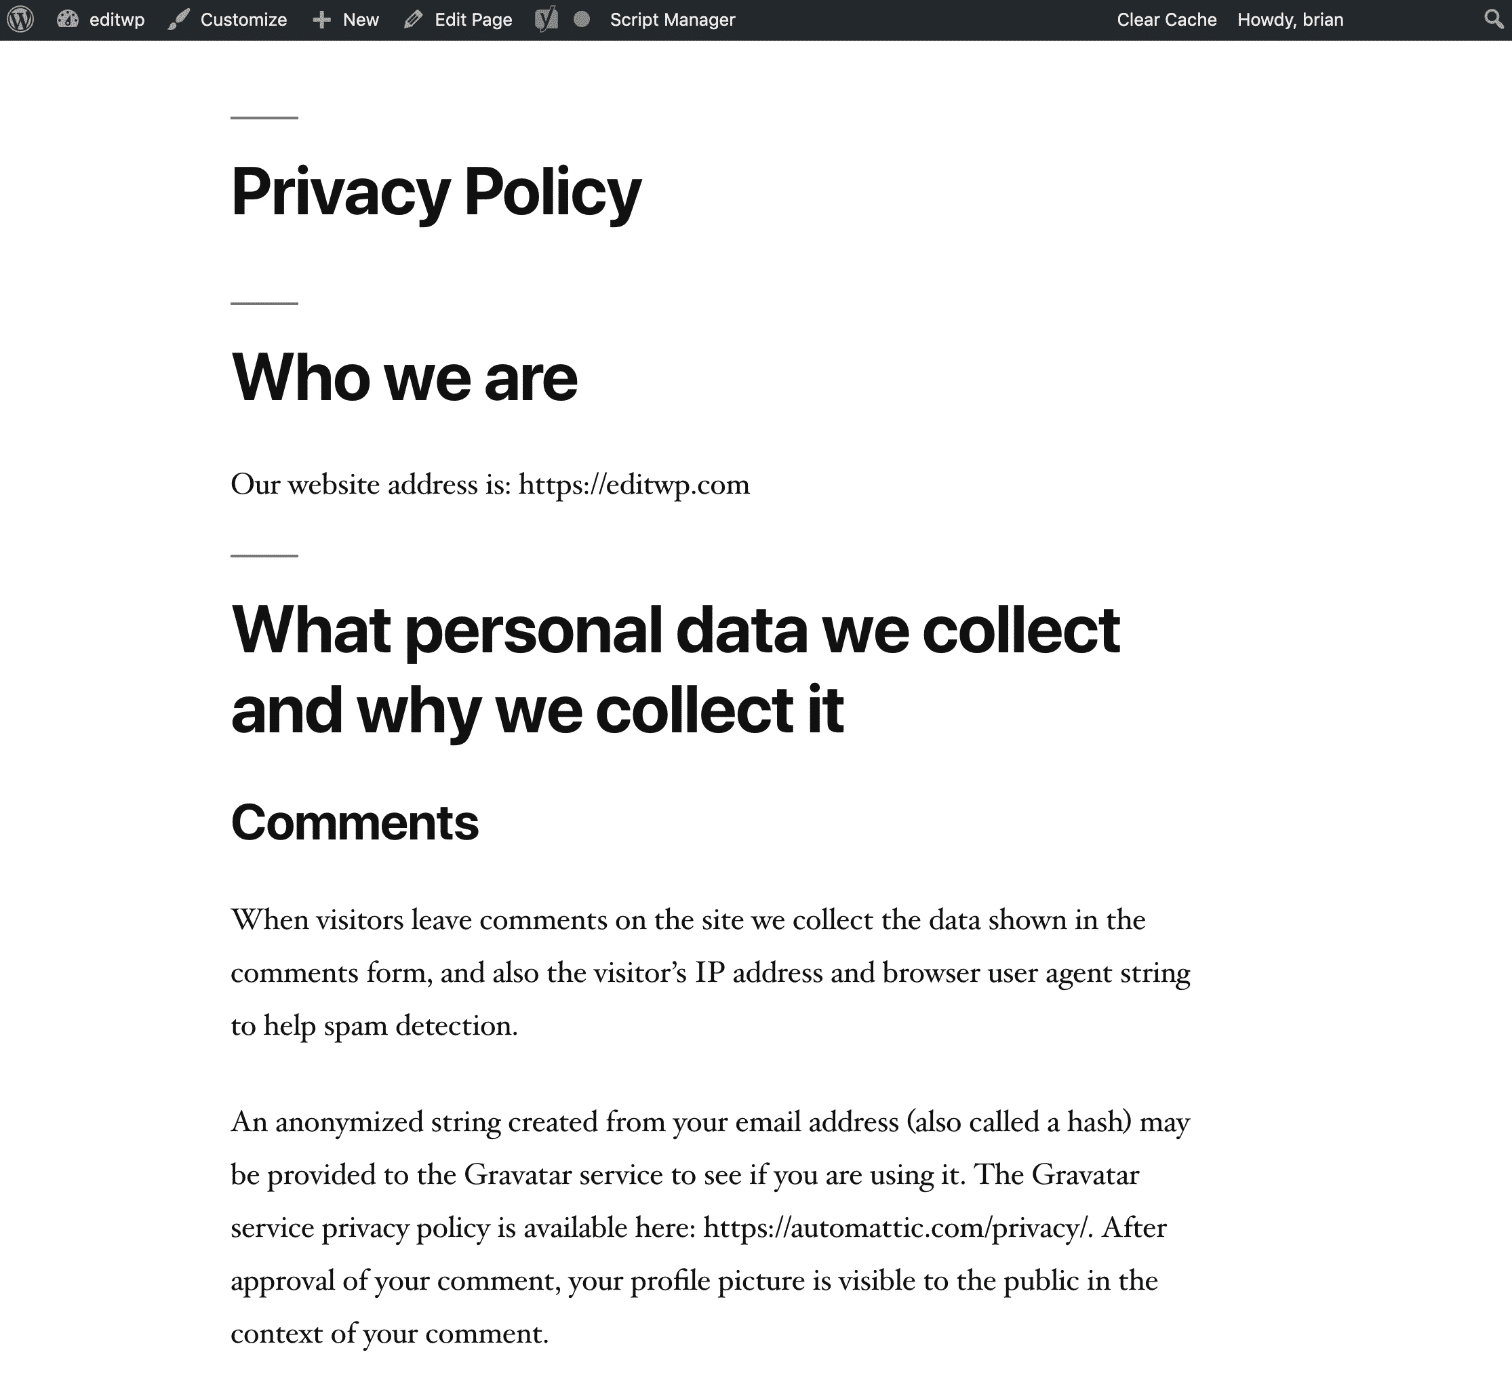 Privacy Policy page example in WordPress